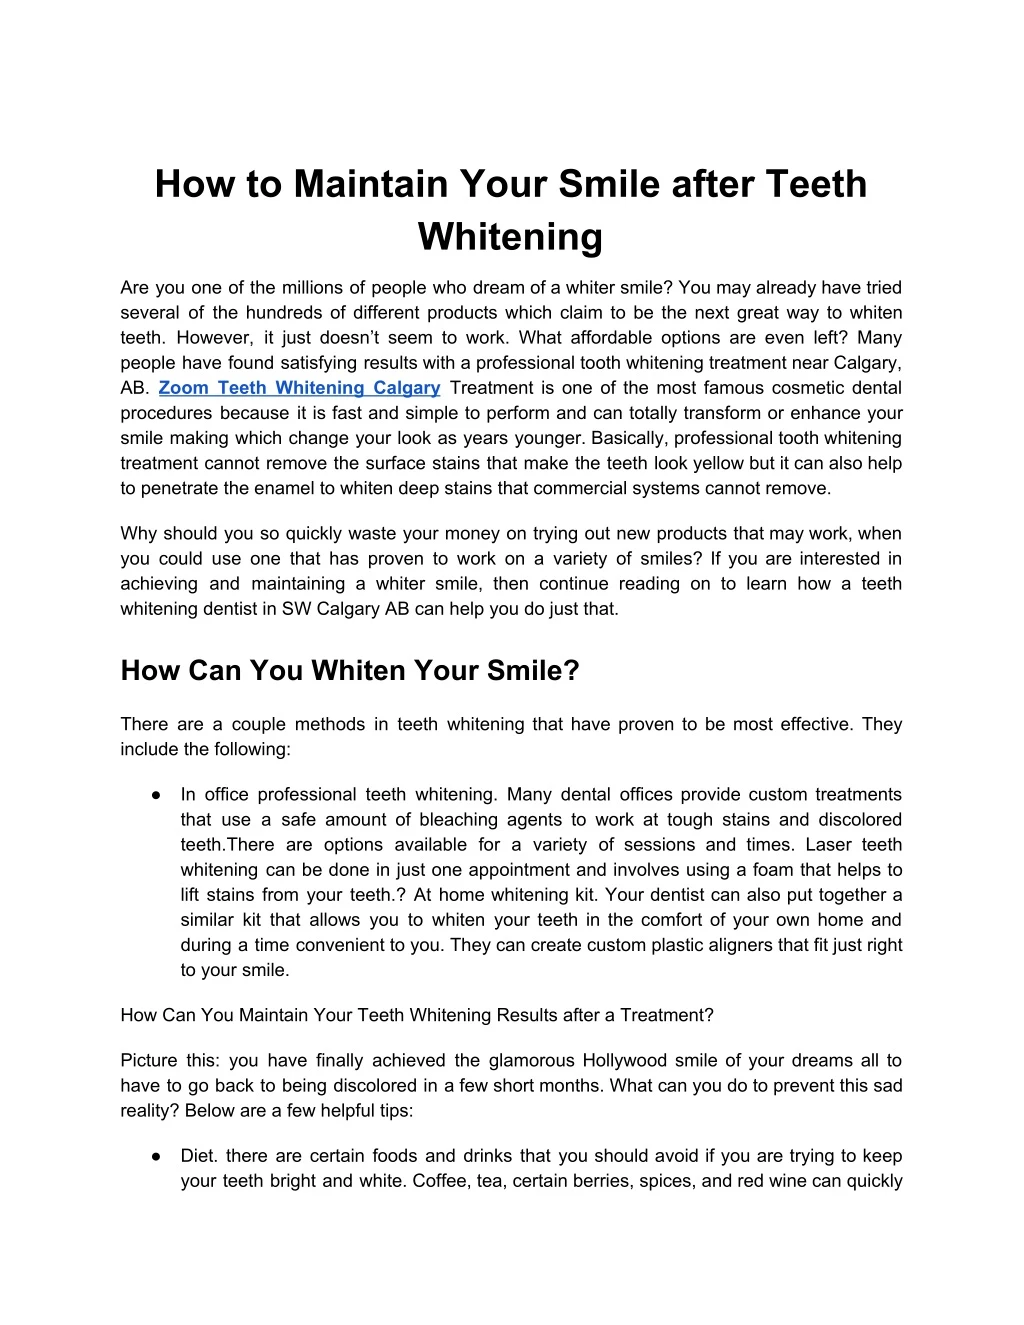 how to maintain your smile after teeth whitening